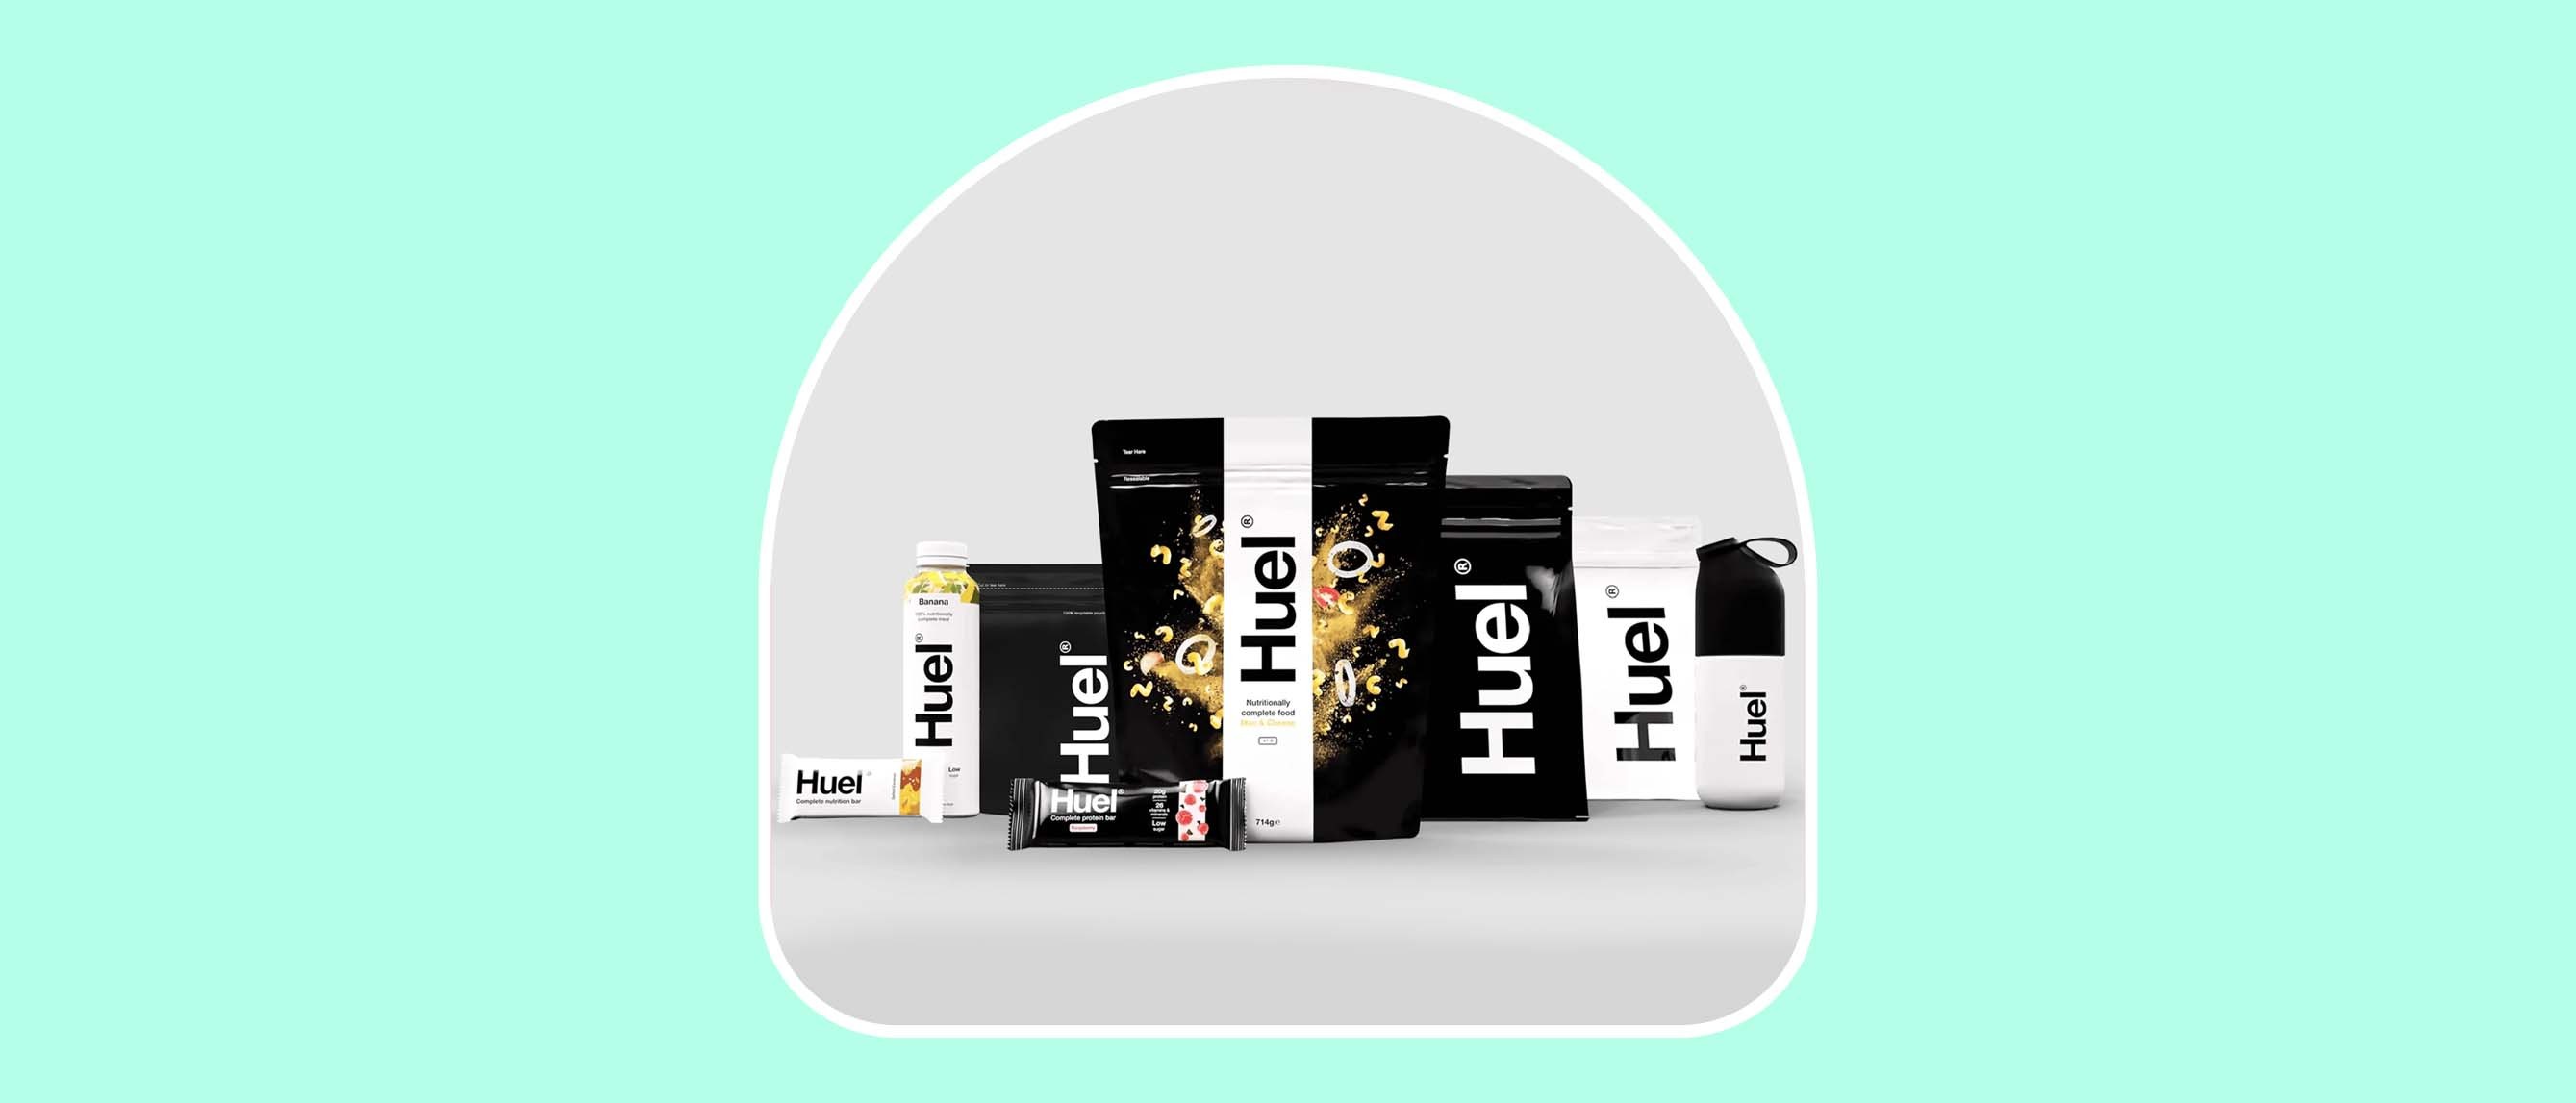 Huel review: 3 reasons to invest in the nutritional supplements